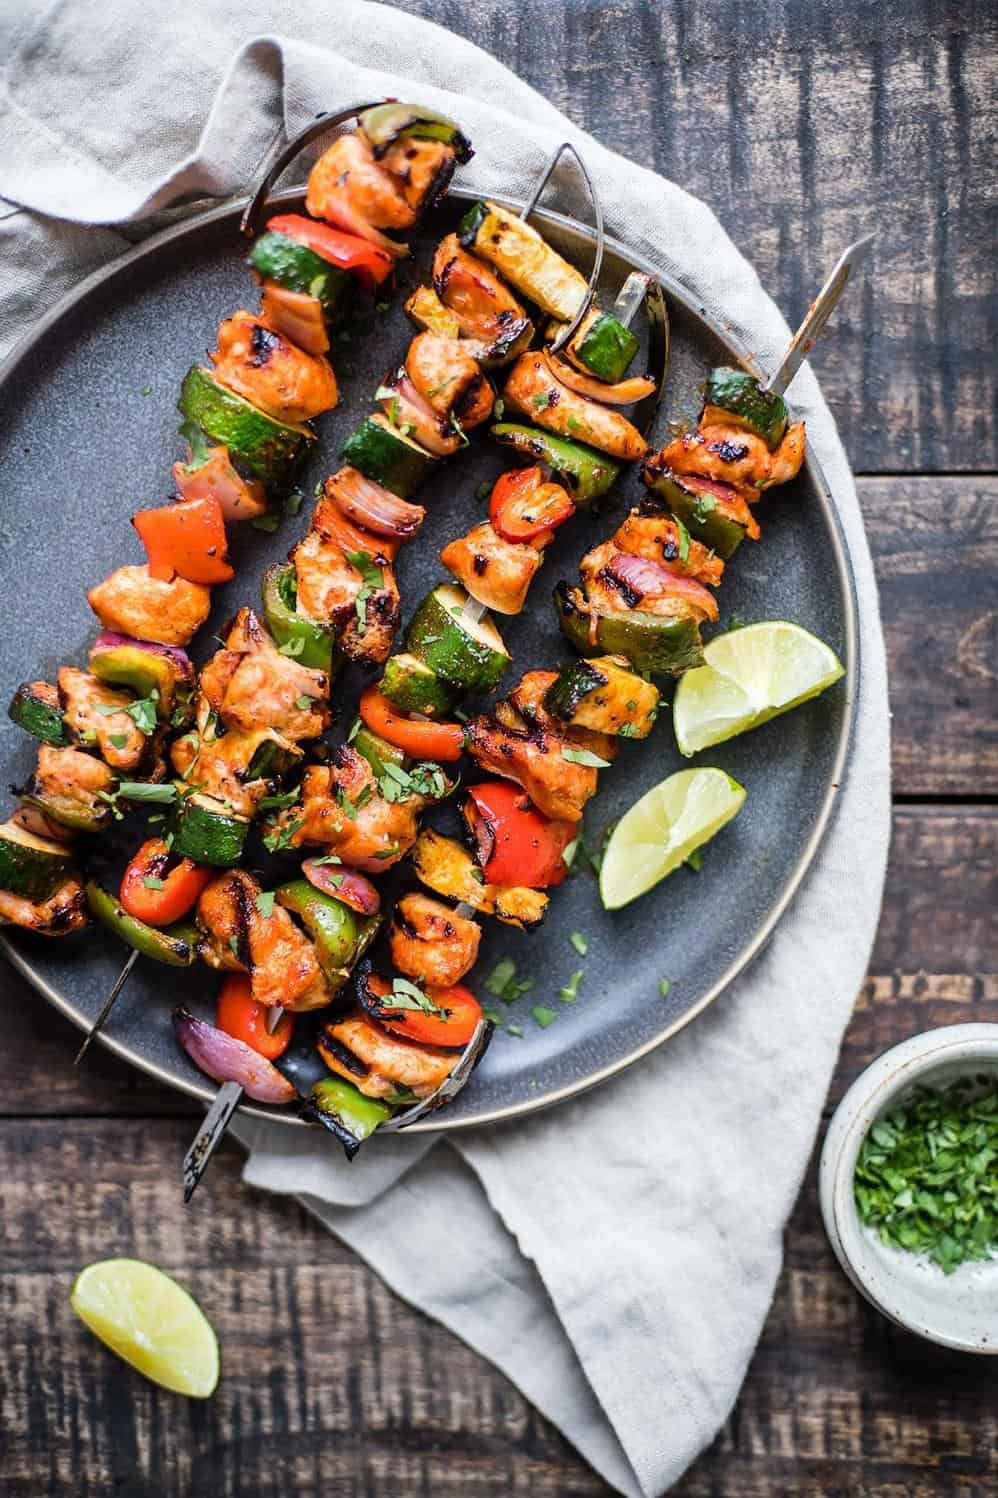  These kabobs are the perfect addition to any backyard BBQ